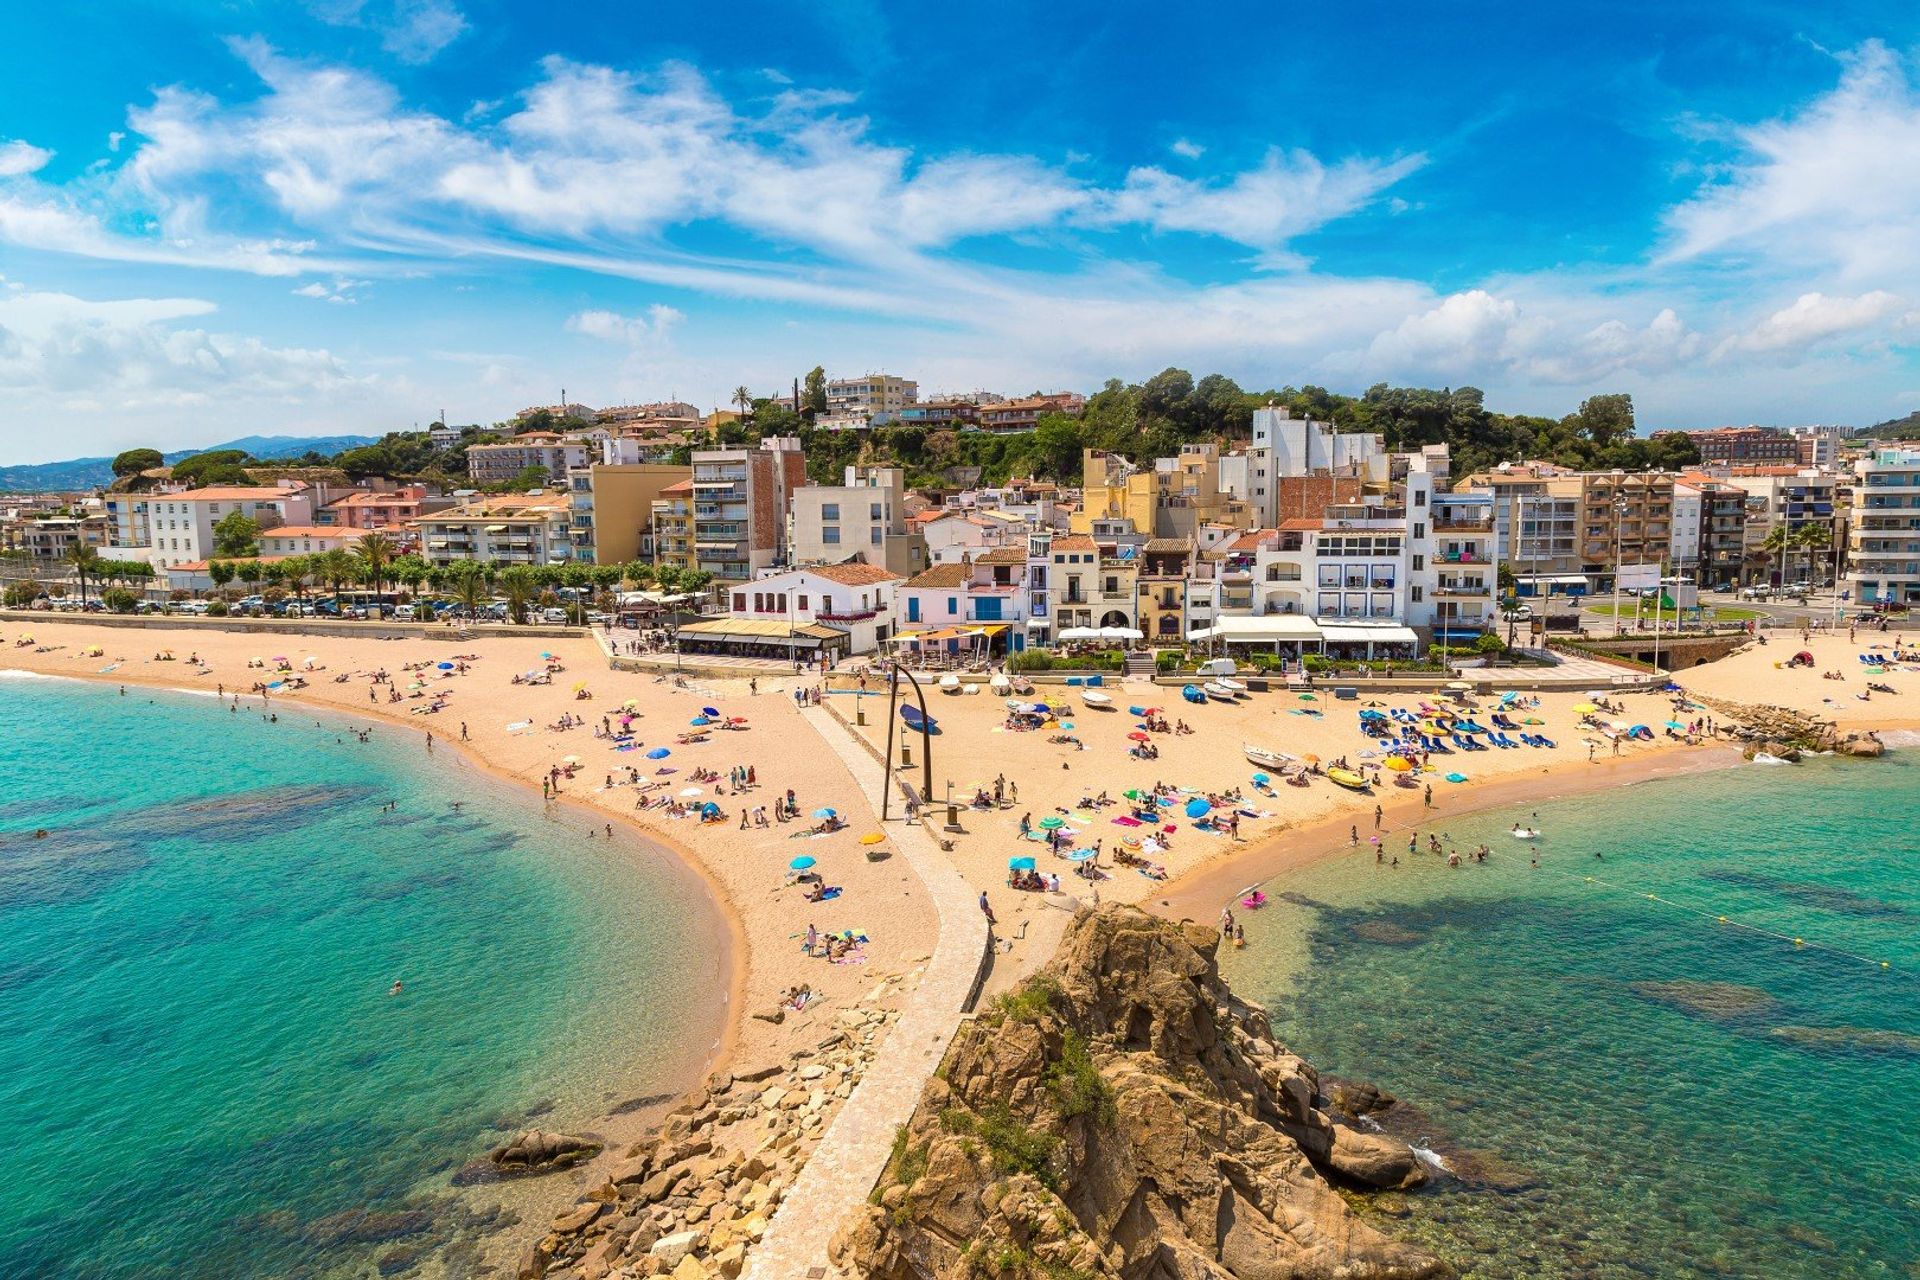 Blanes' Mediterranean charm seen through the traditional whitewashed houses along the seafront